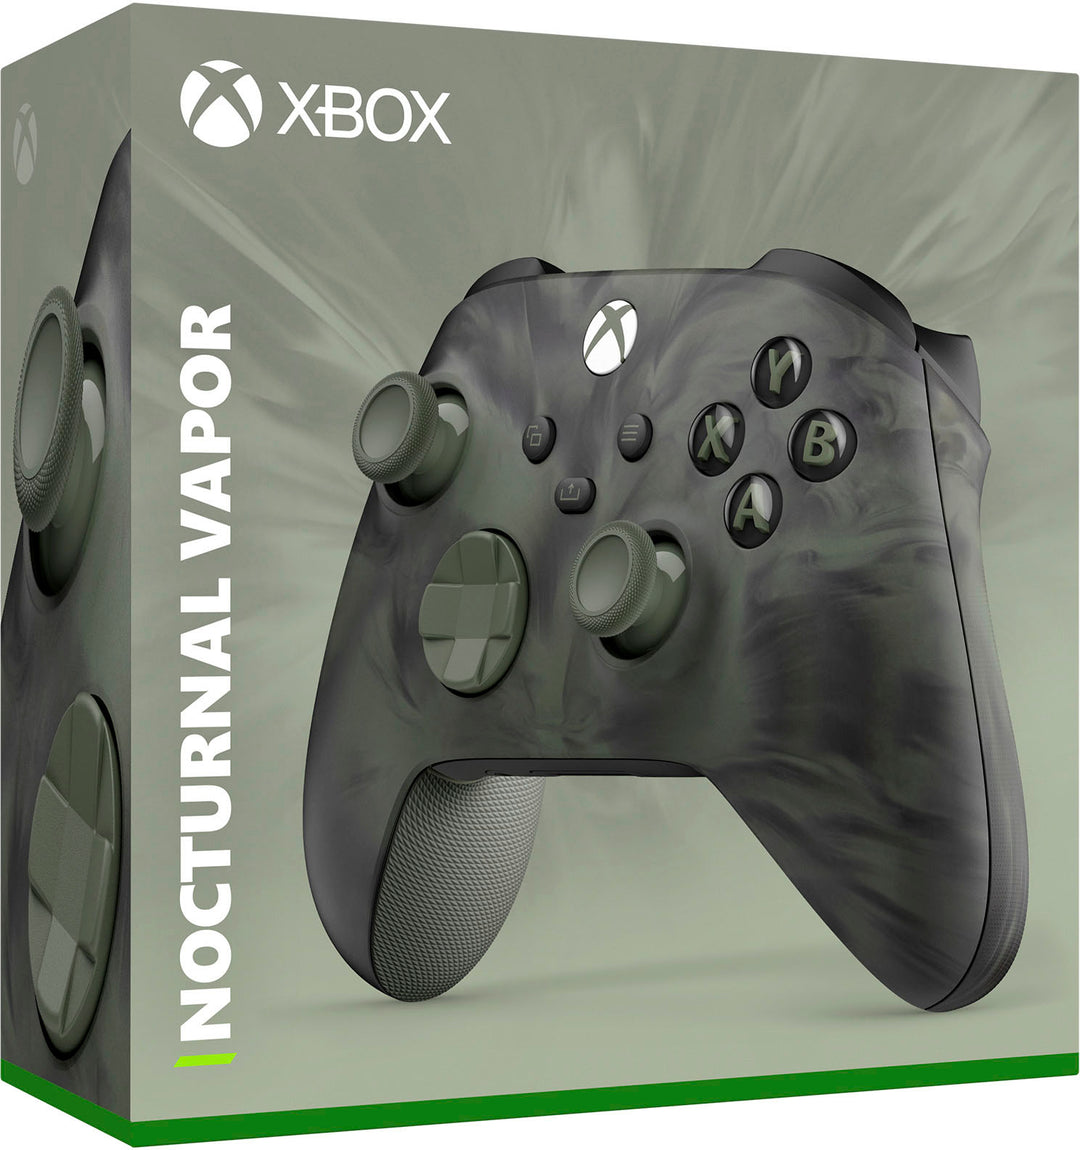 Microsoft - Xbox Wireless Controller for Xbox Series X, Xbox Series S, Xbox One, Windows Devices - Nocturnal Vapor Special Edition_5